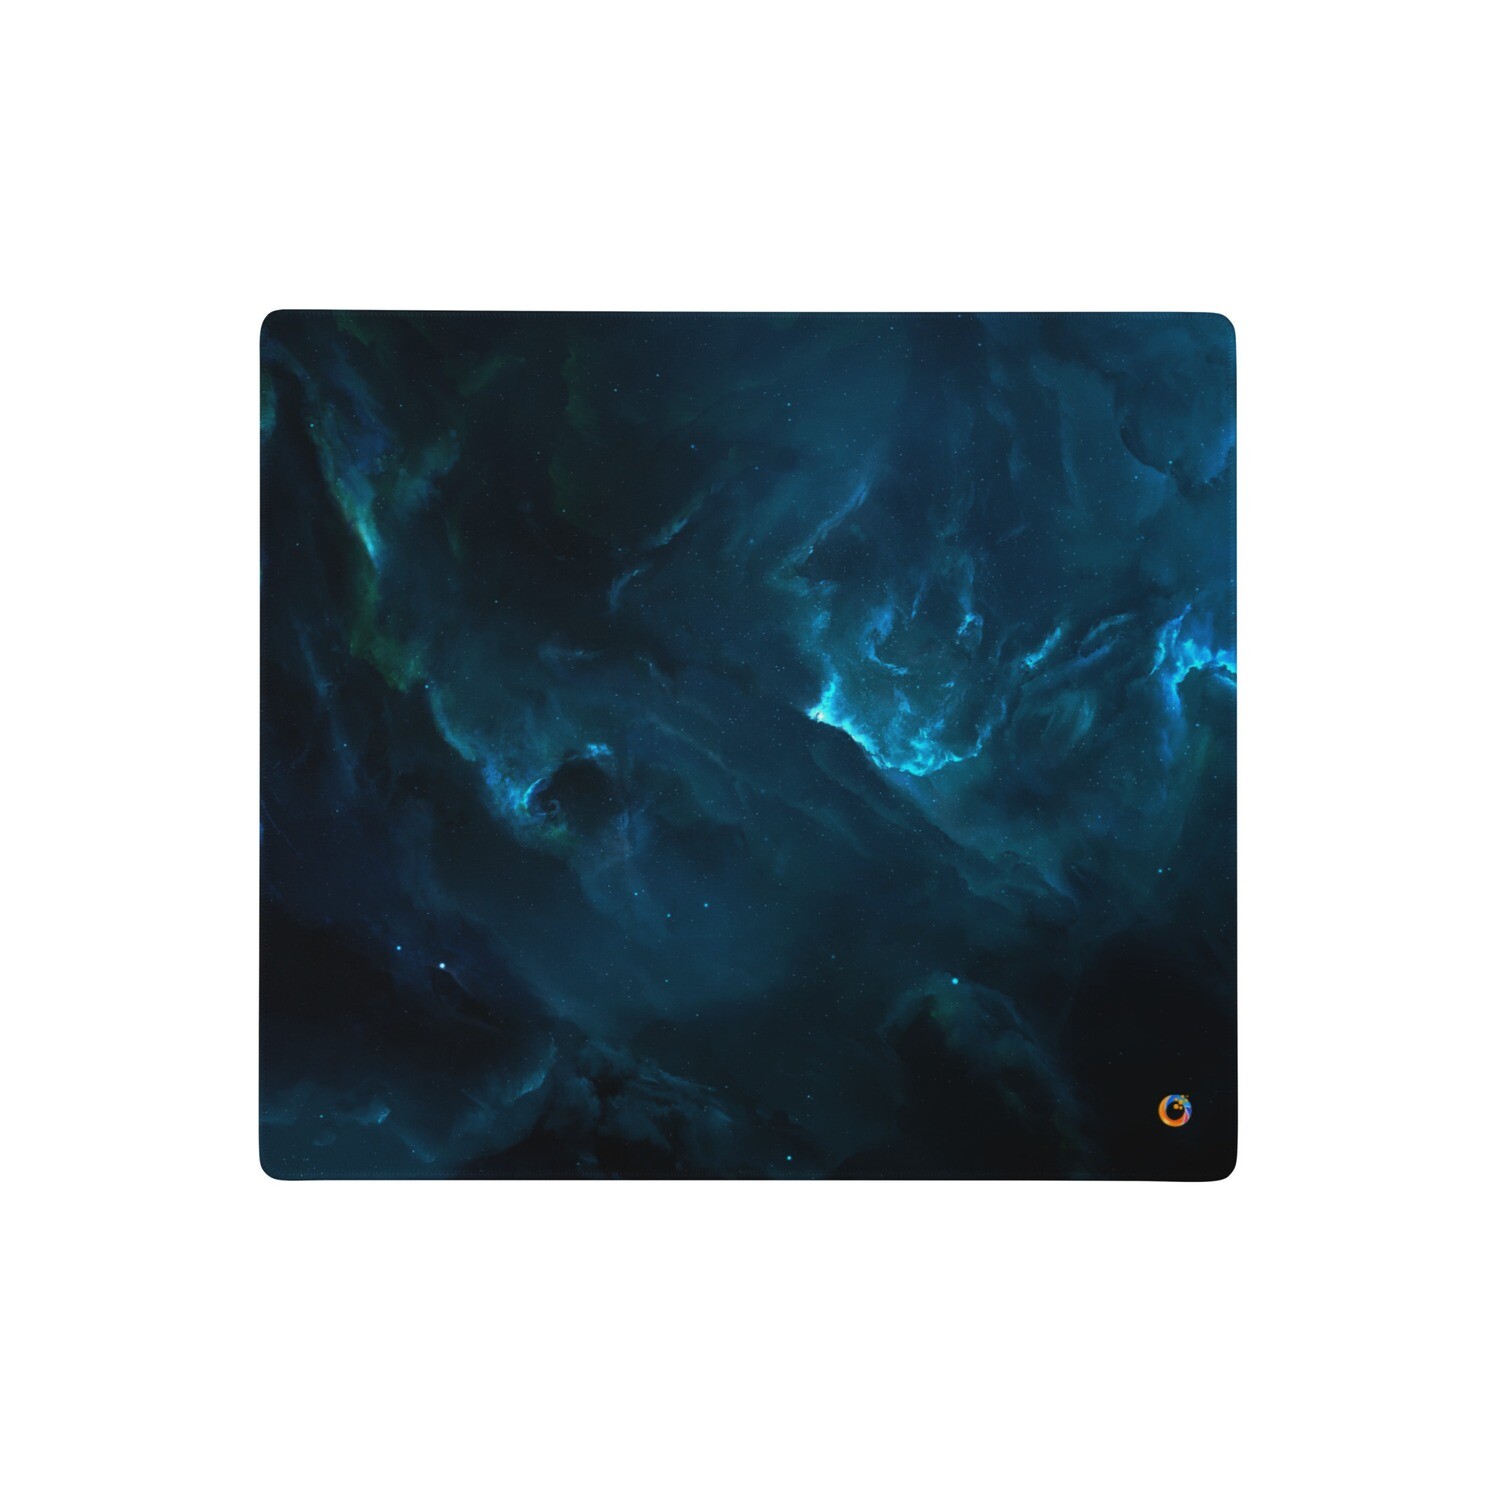 Gaming mouse pad #8